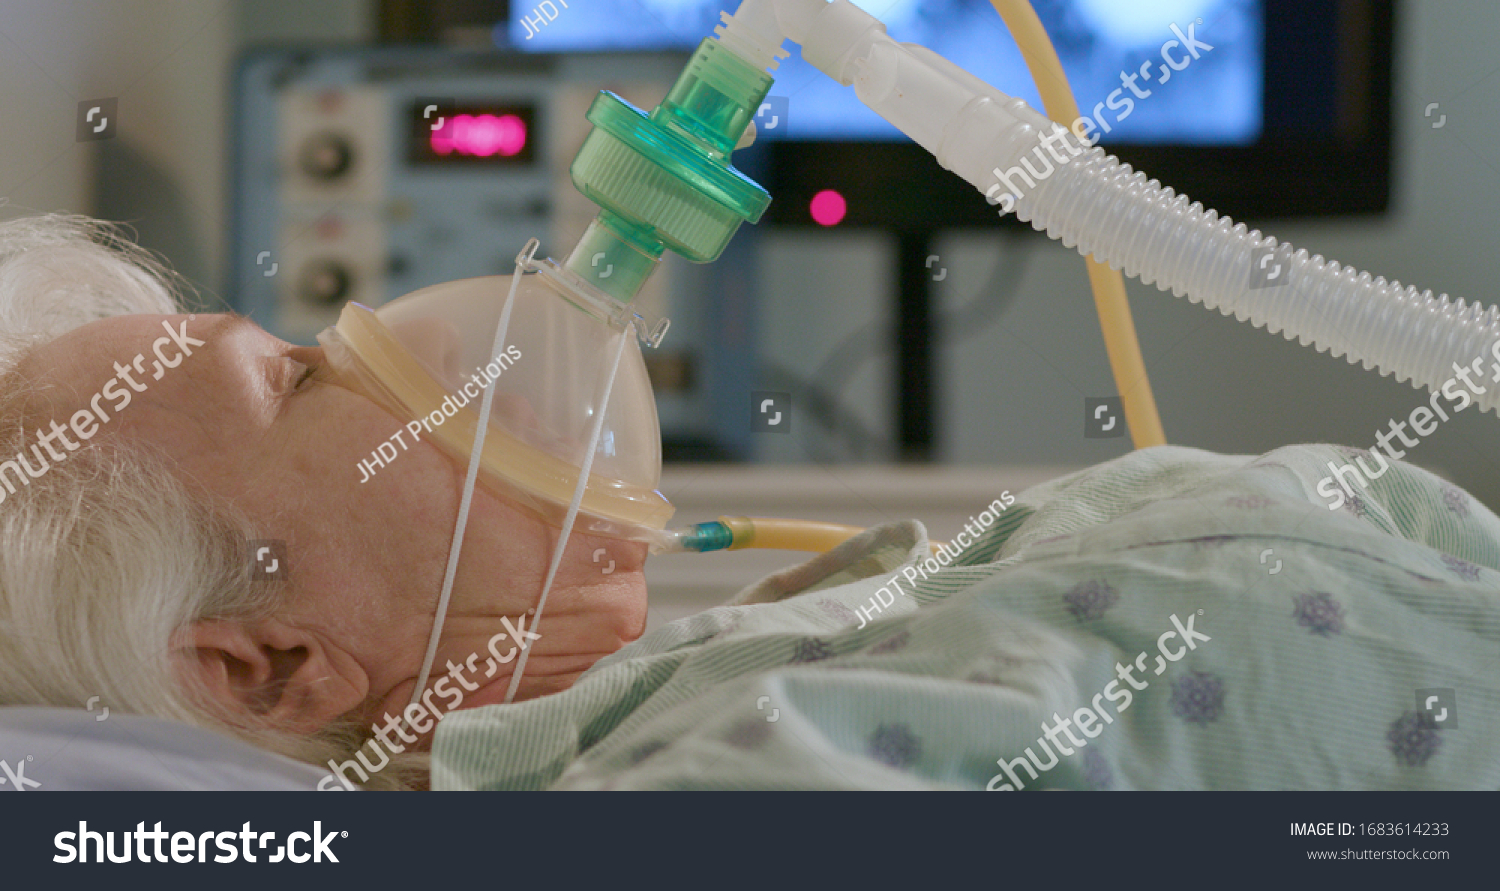 A hospitalized elderly woman attached to a device to help her breathe with an image of the coronavirus in the background. #1683614233